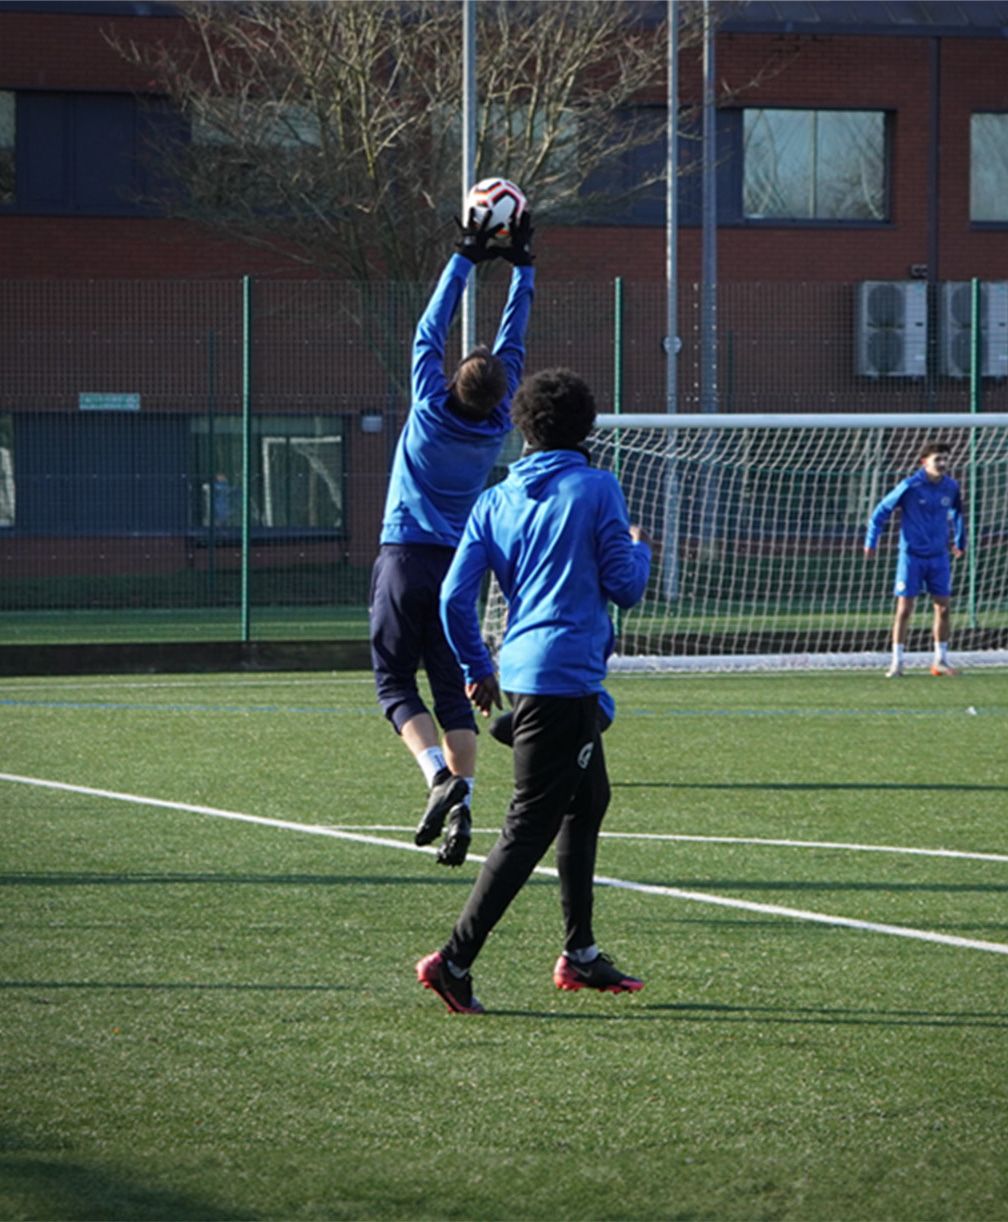 Goalkeeper jumps to catch the ball above him